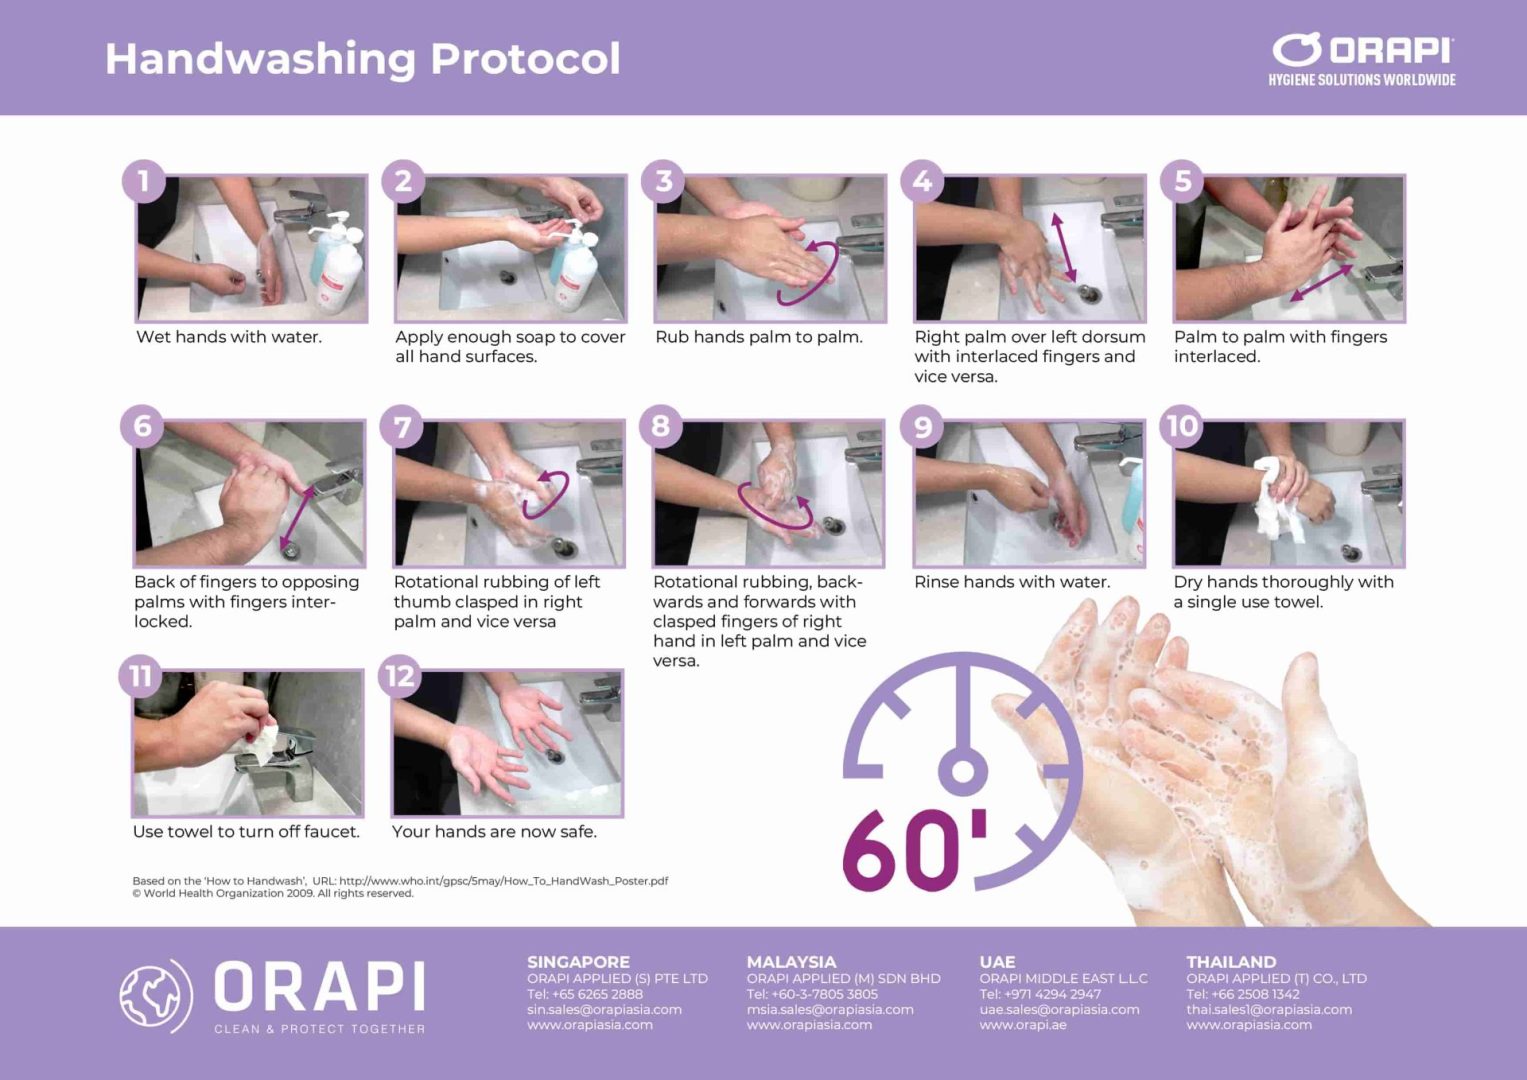 General Hand Wash Protocol - Step by Step To Properly Wash Your Hands